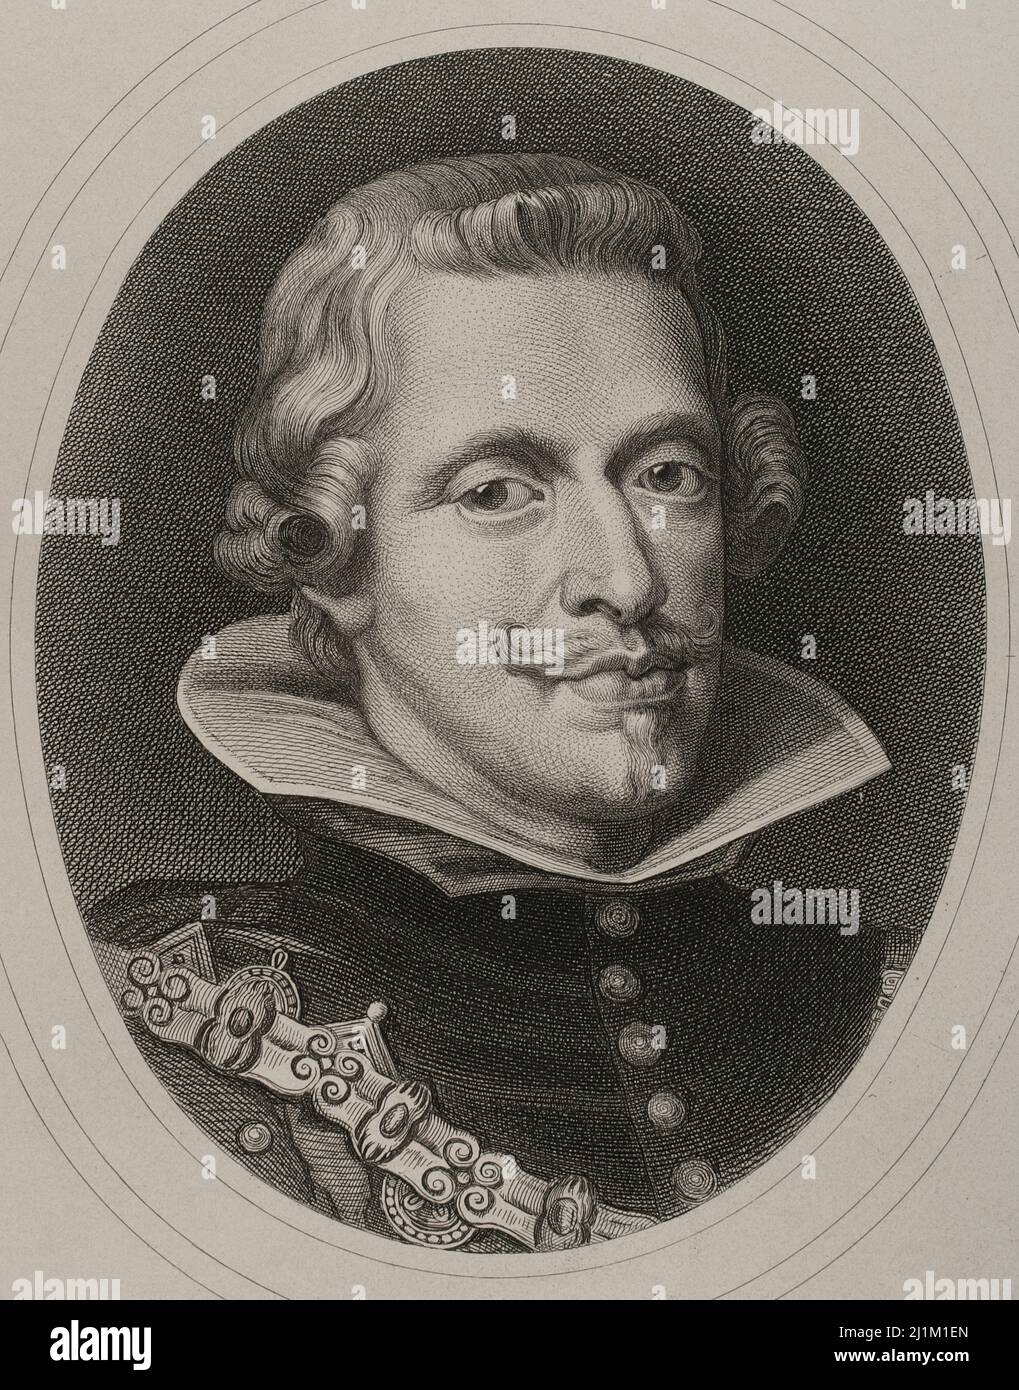 Philip IV (1605-1665). King of Spain (1621-1665) and Portugal (1621-1640). House of Austria. Portrait. Engraving by Masson. Lithography by Magín Pujadas. Historia General de España, by Modesto Lafuente. Volume III. Published in Barcelona, 1879. Stock Photo